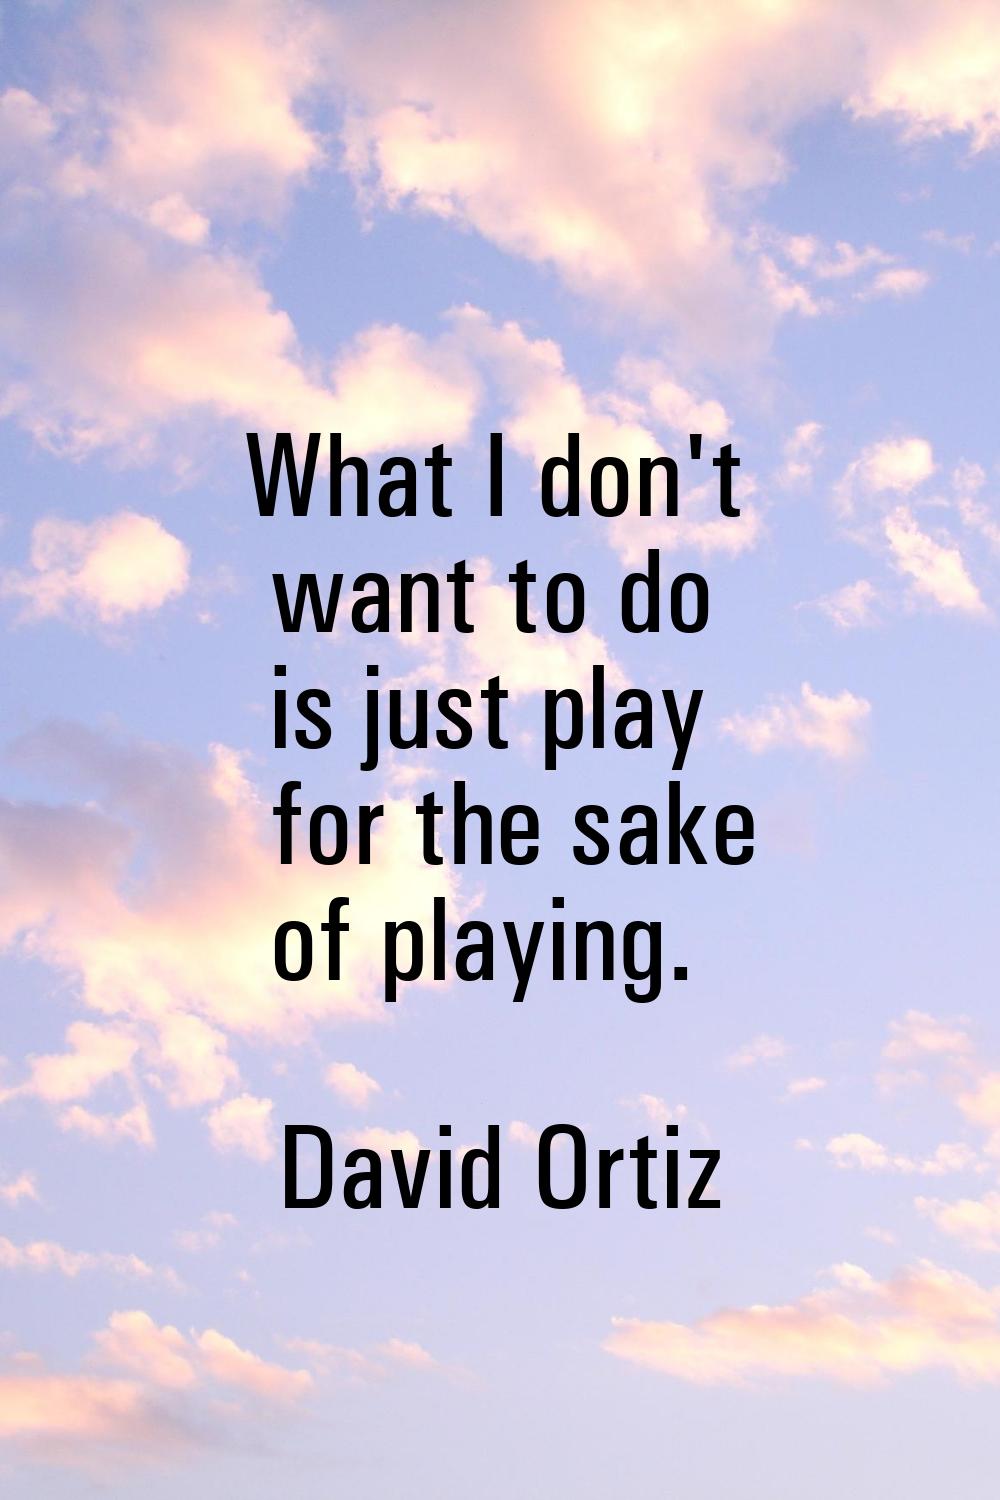 What I don't want to do is just play for the sake of playing.